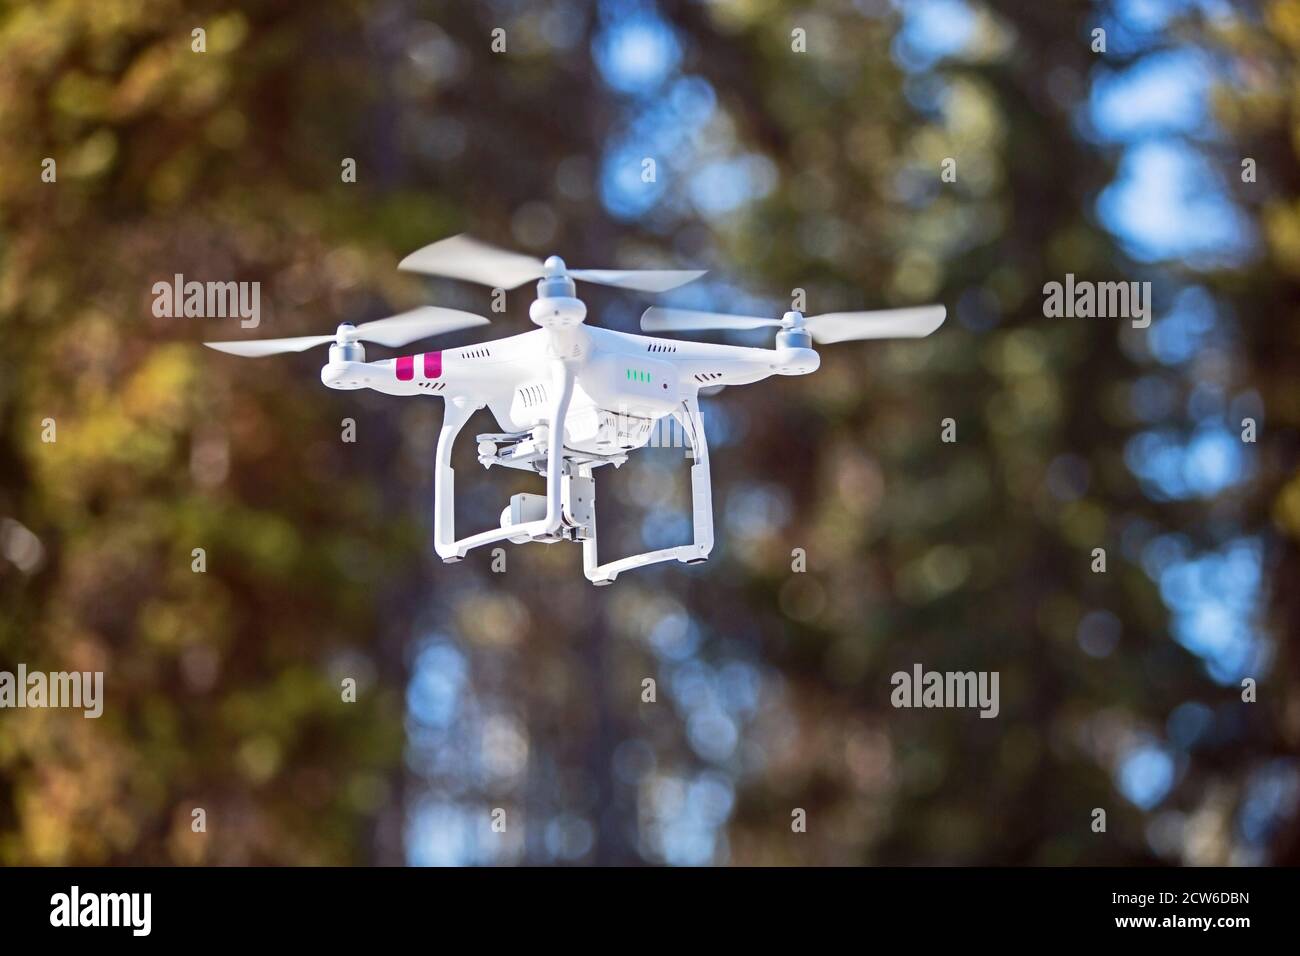 Quadro-copter, flying a long forest, recording video footage of the forest. blurred background, bokeh, Stock Photo